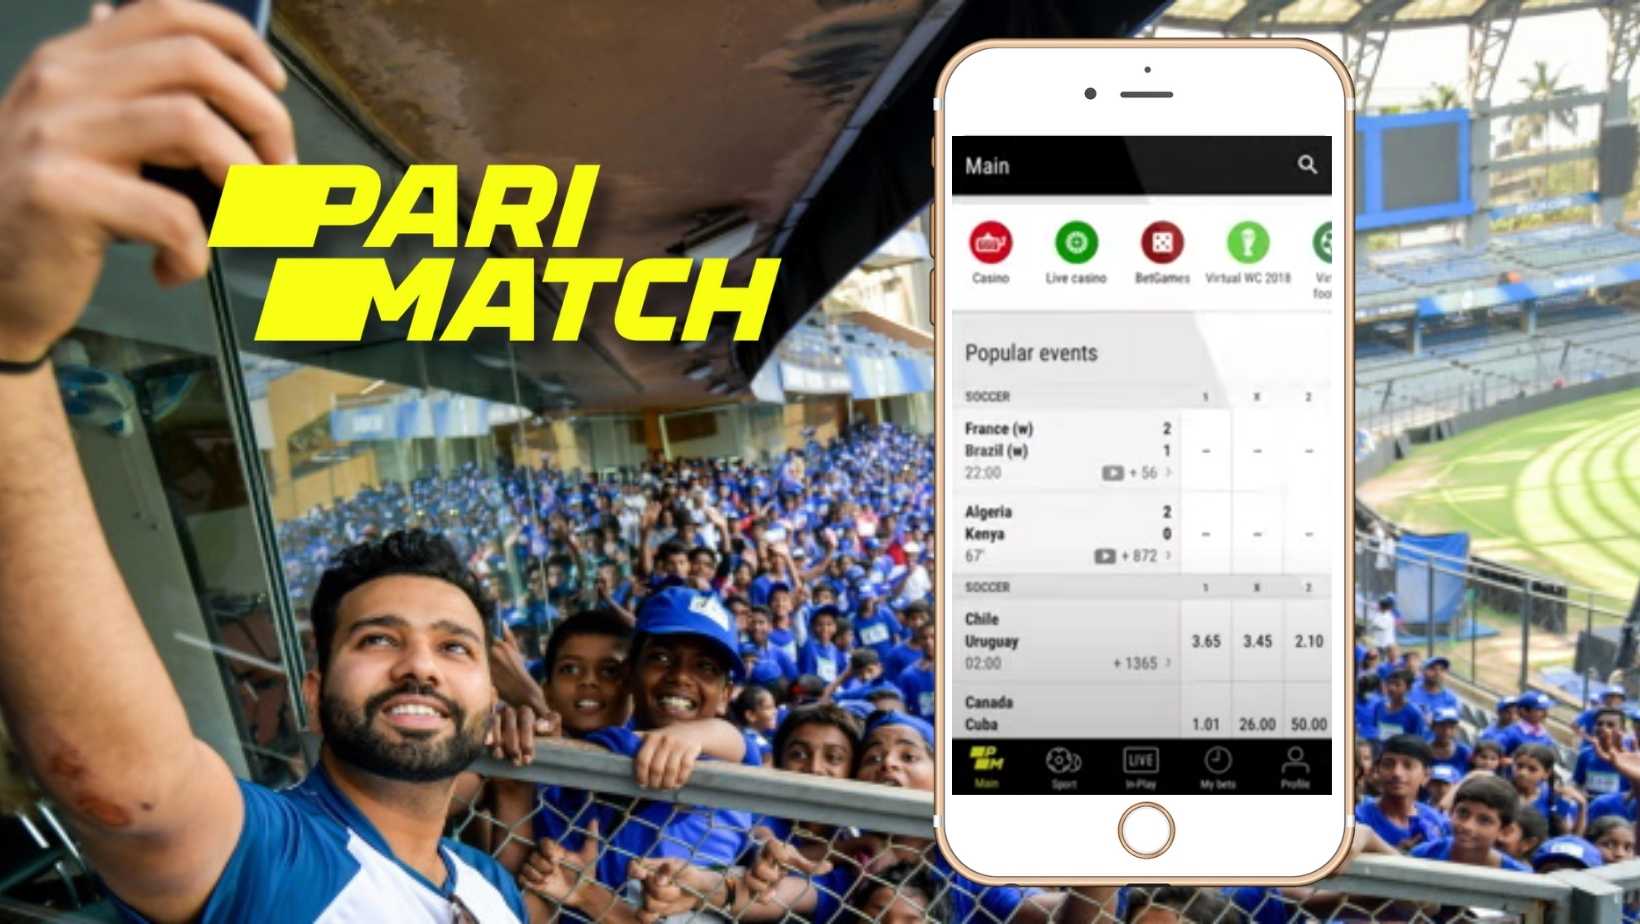 Parimatch betting application in India